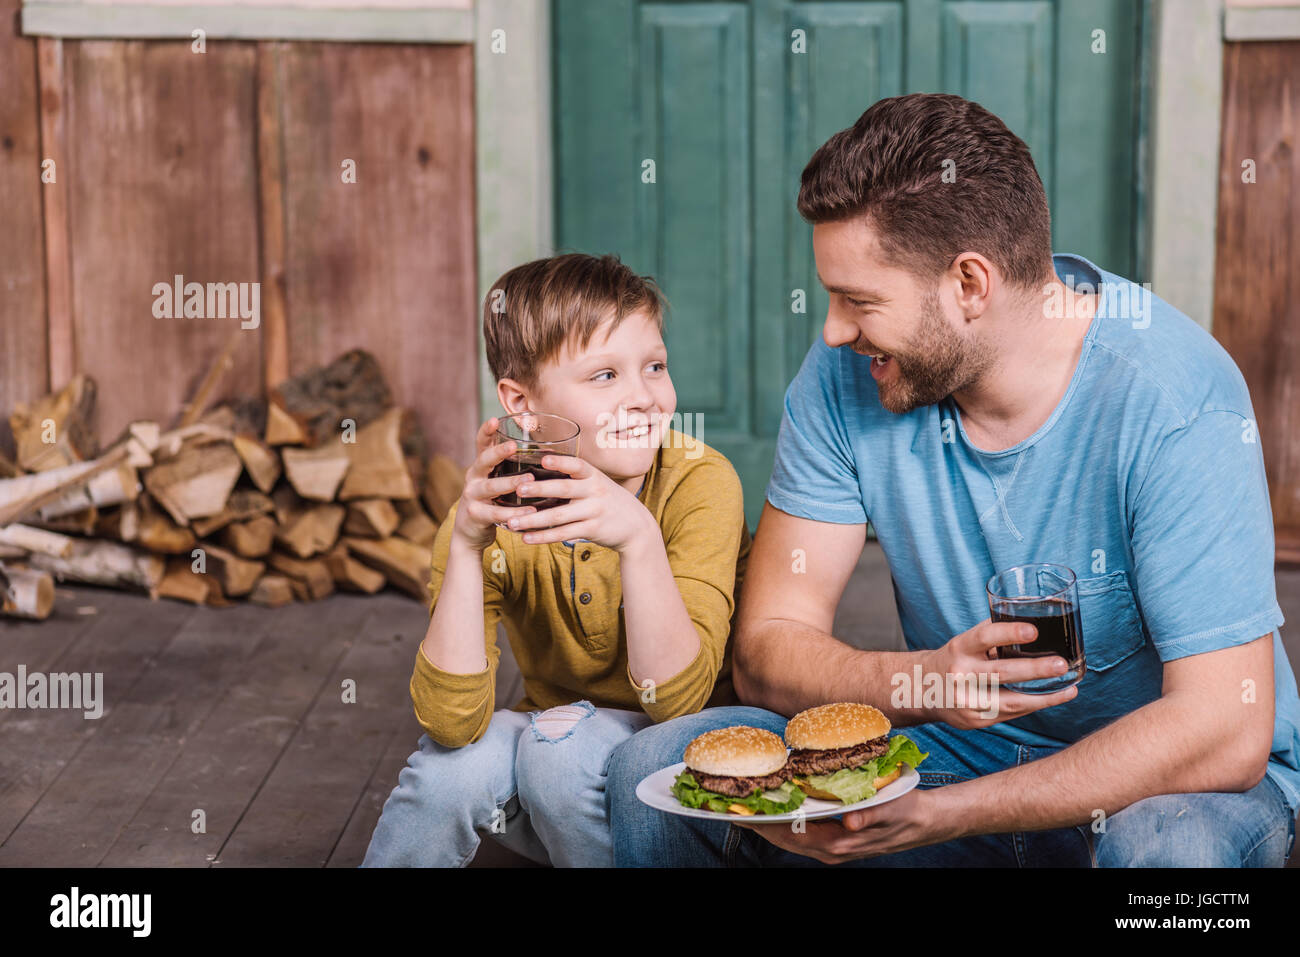 portrait of happy father and son eating homemade burgers Stock Photo